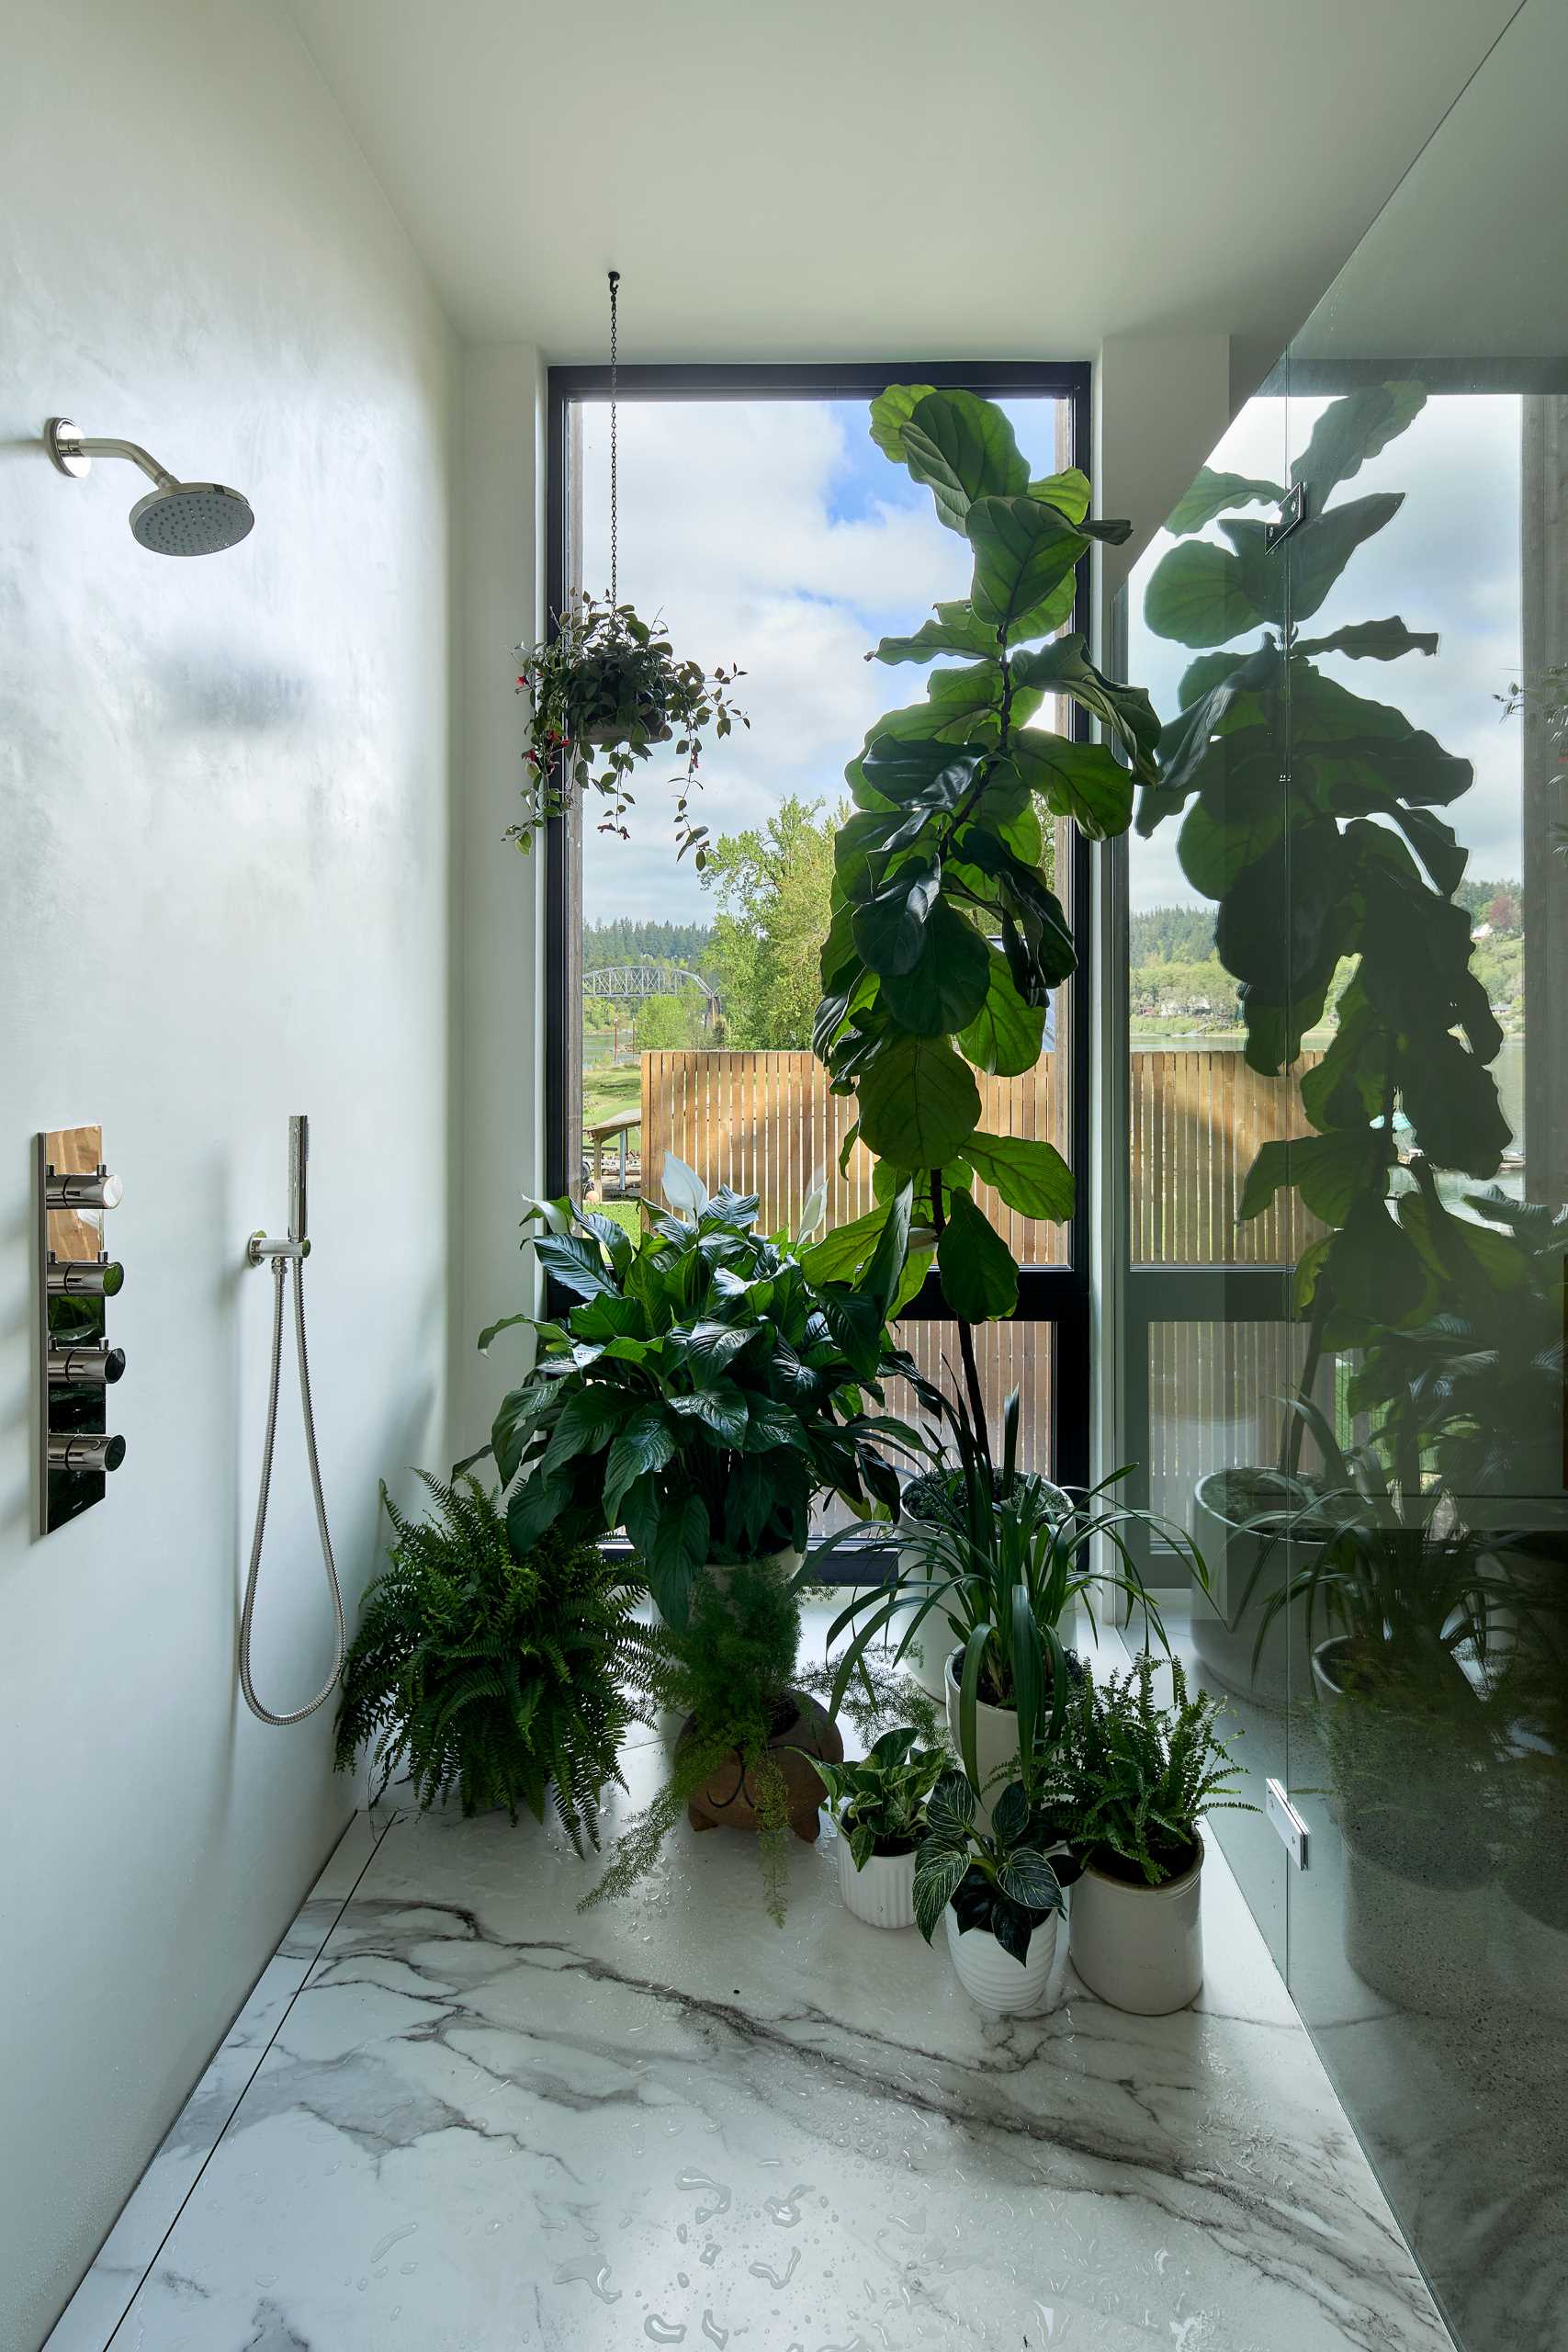 This modern shower has a floor-to-ceiling window that has privacy created by using plants.